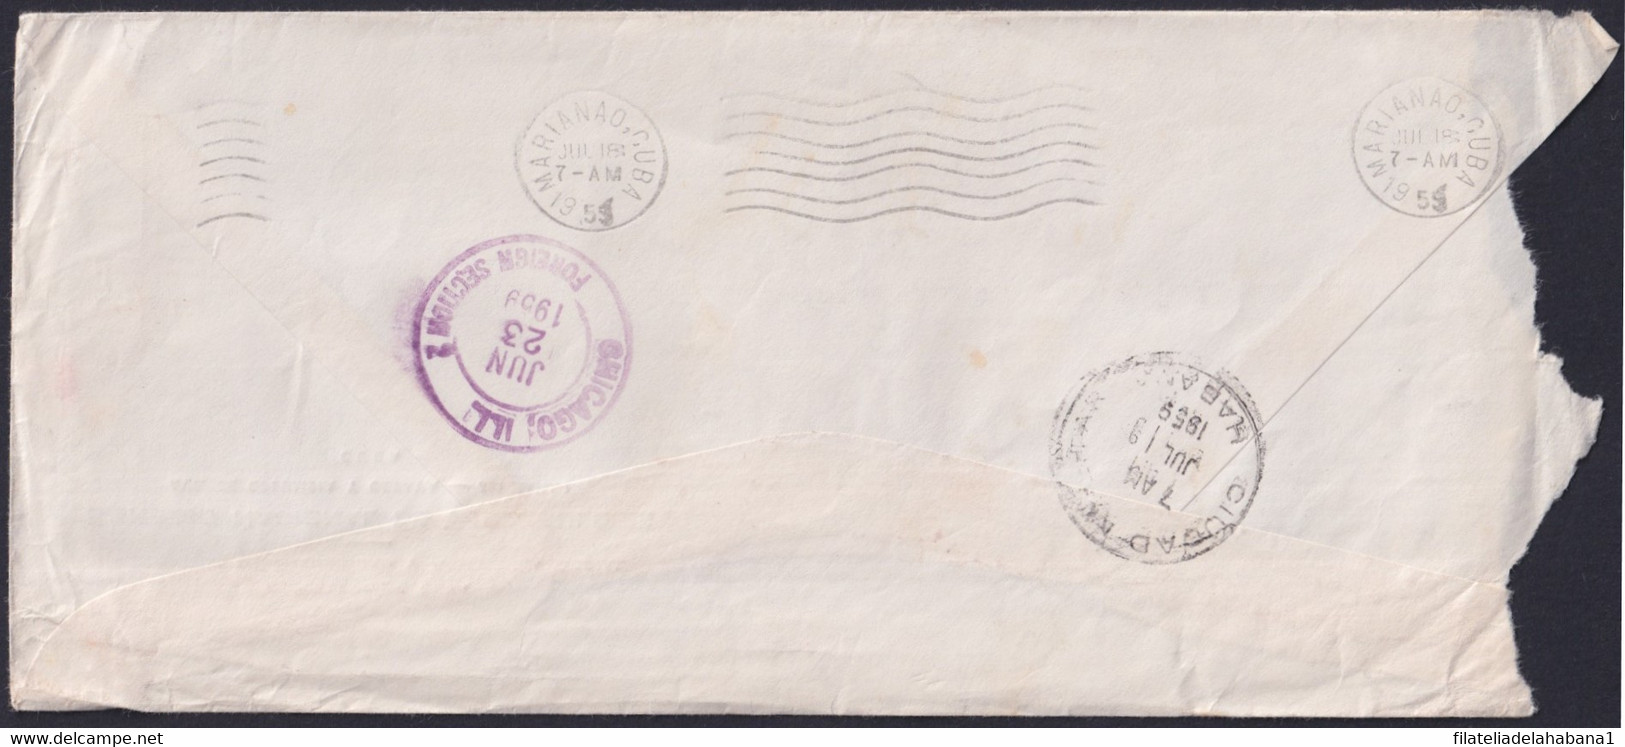 1959-H-39 CUBA 1959 LG-2158 OFFICIAL COVER POSTMARK FORWARDED COVER TO USA. - Storia Postale